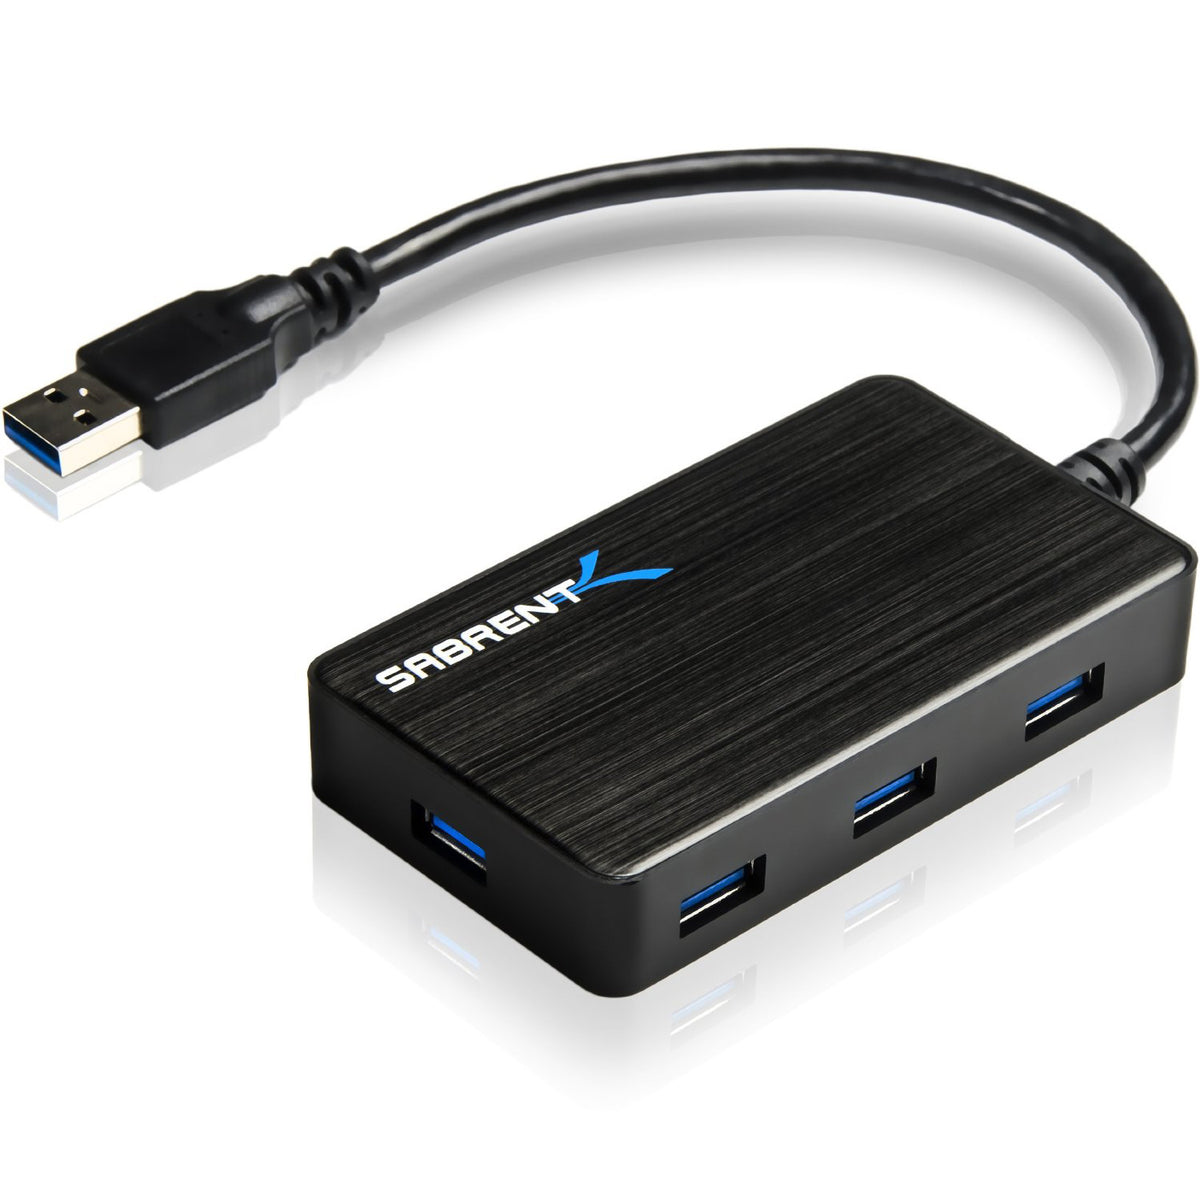 7 Port Portable USB 3.0 Hub with 4A Power Adapter